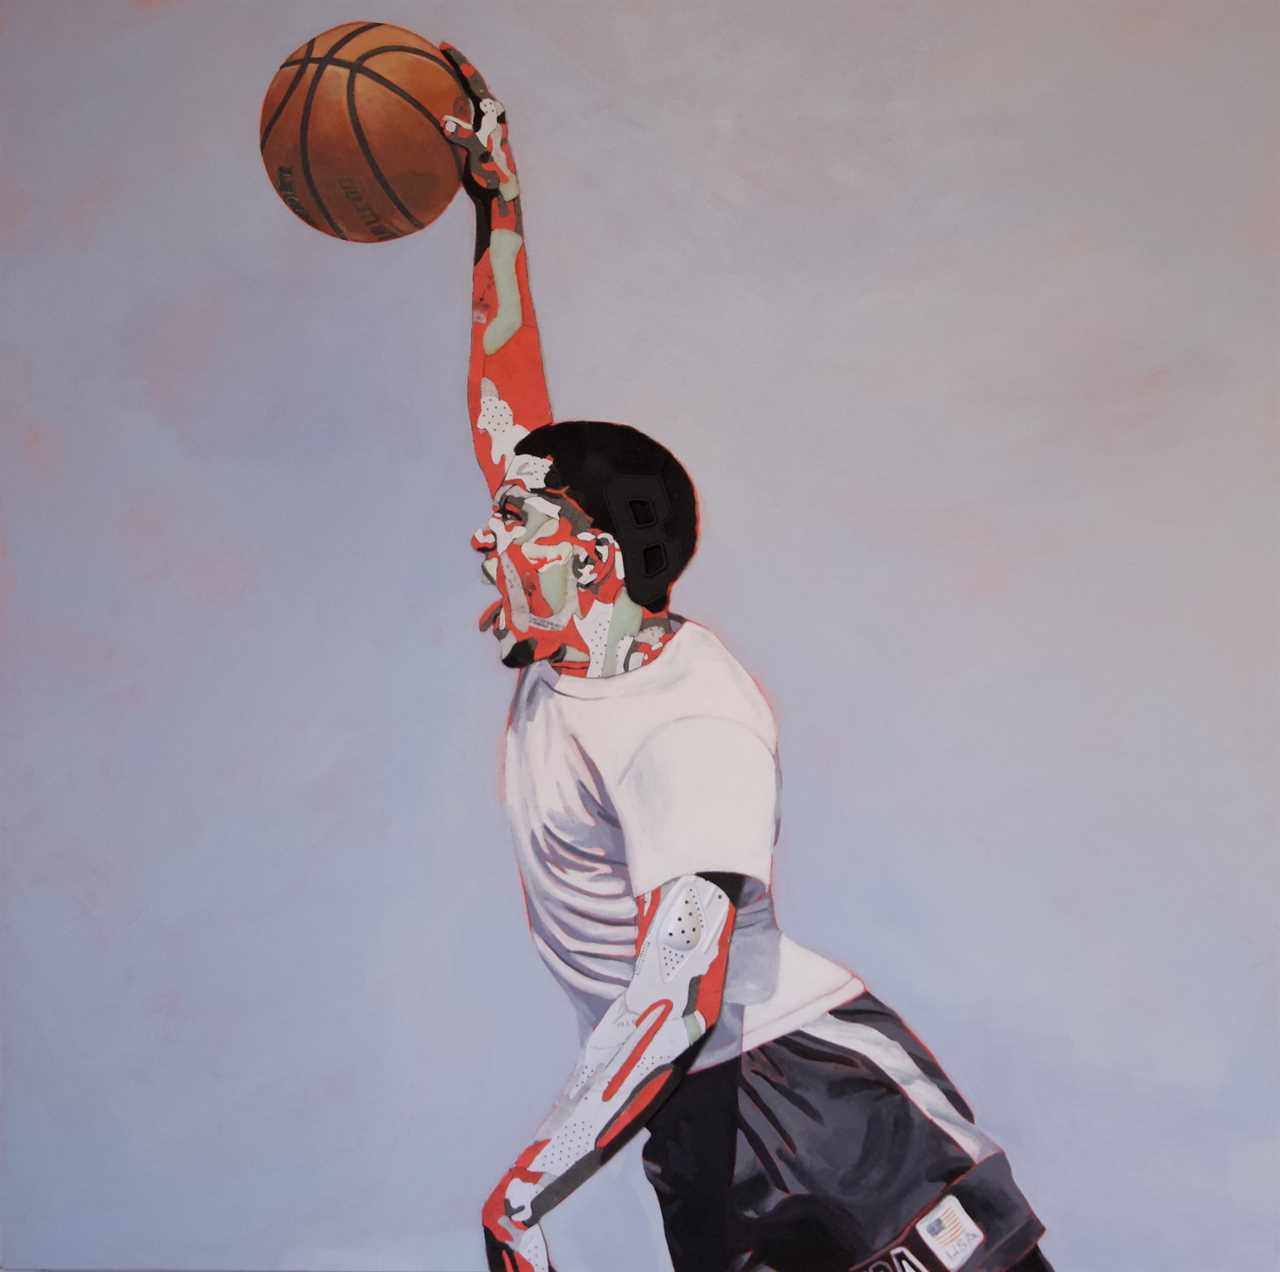 Hoops, Rap and Everything Black: Artist Justin Ruby Cuts Up Your Favorite Kicks to Make Stunning Basketball Portraits